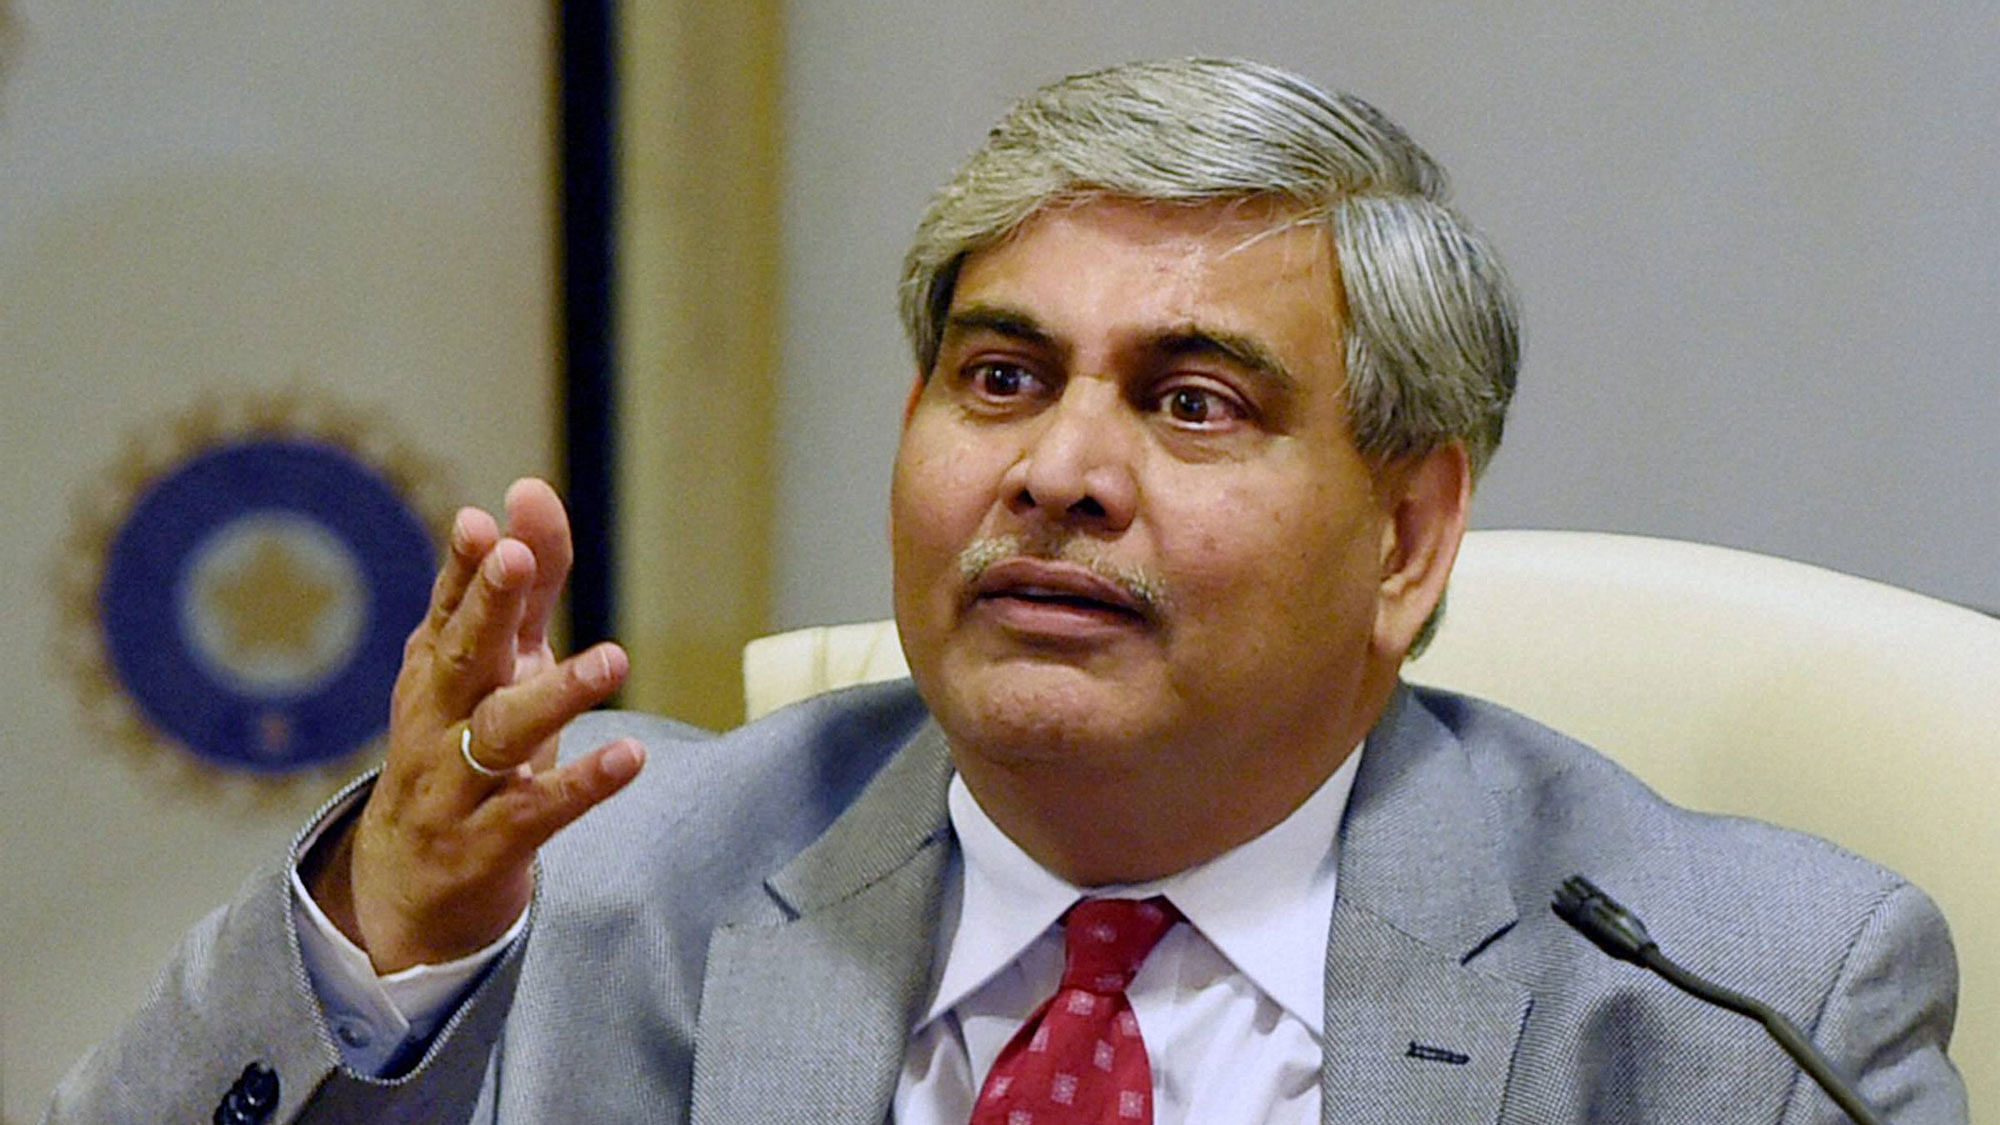 ICC chairman and former BCCI president Shashank Manohar is due to meet the BCCI top brass in Mumbai on 18 March.